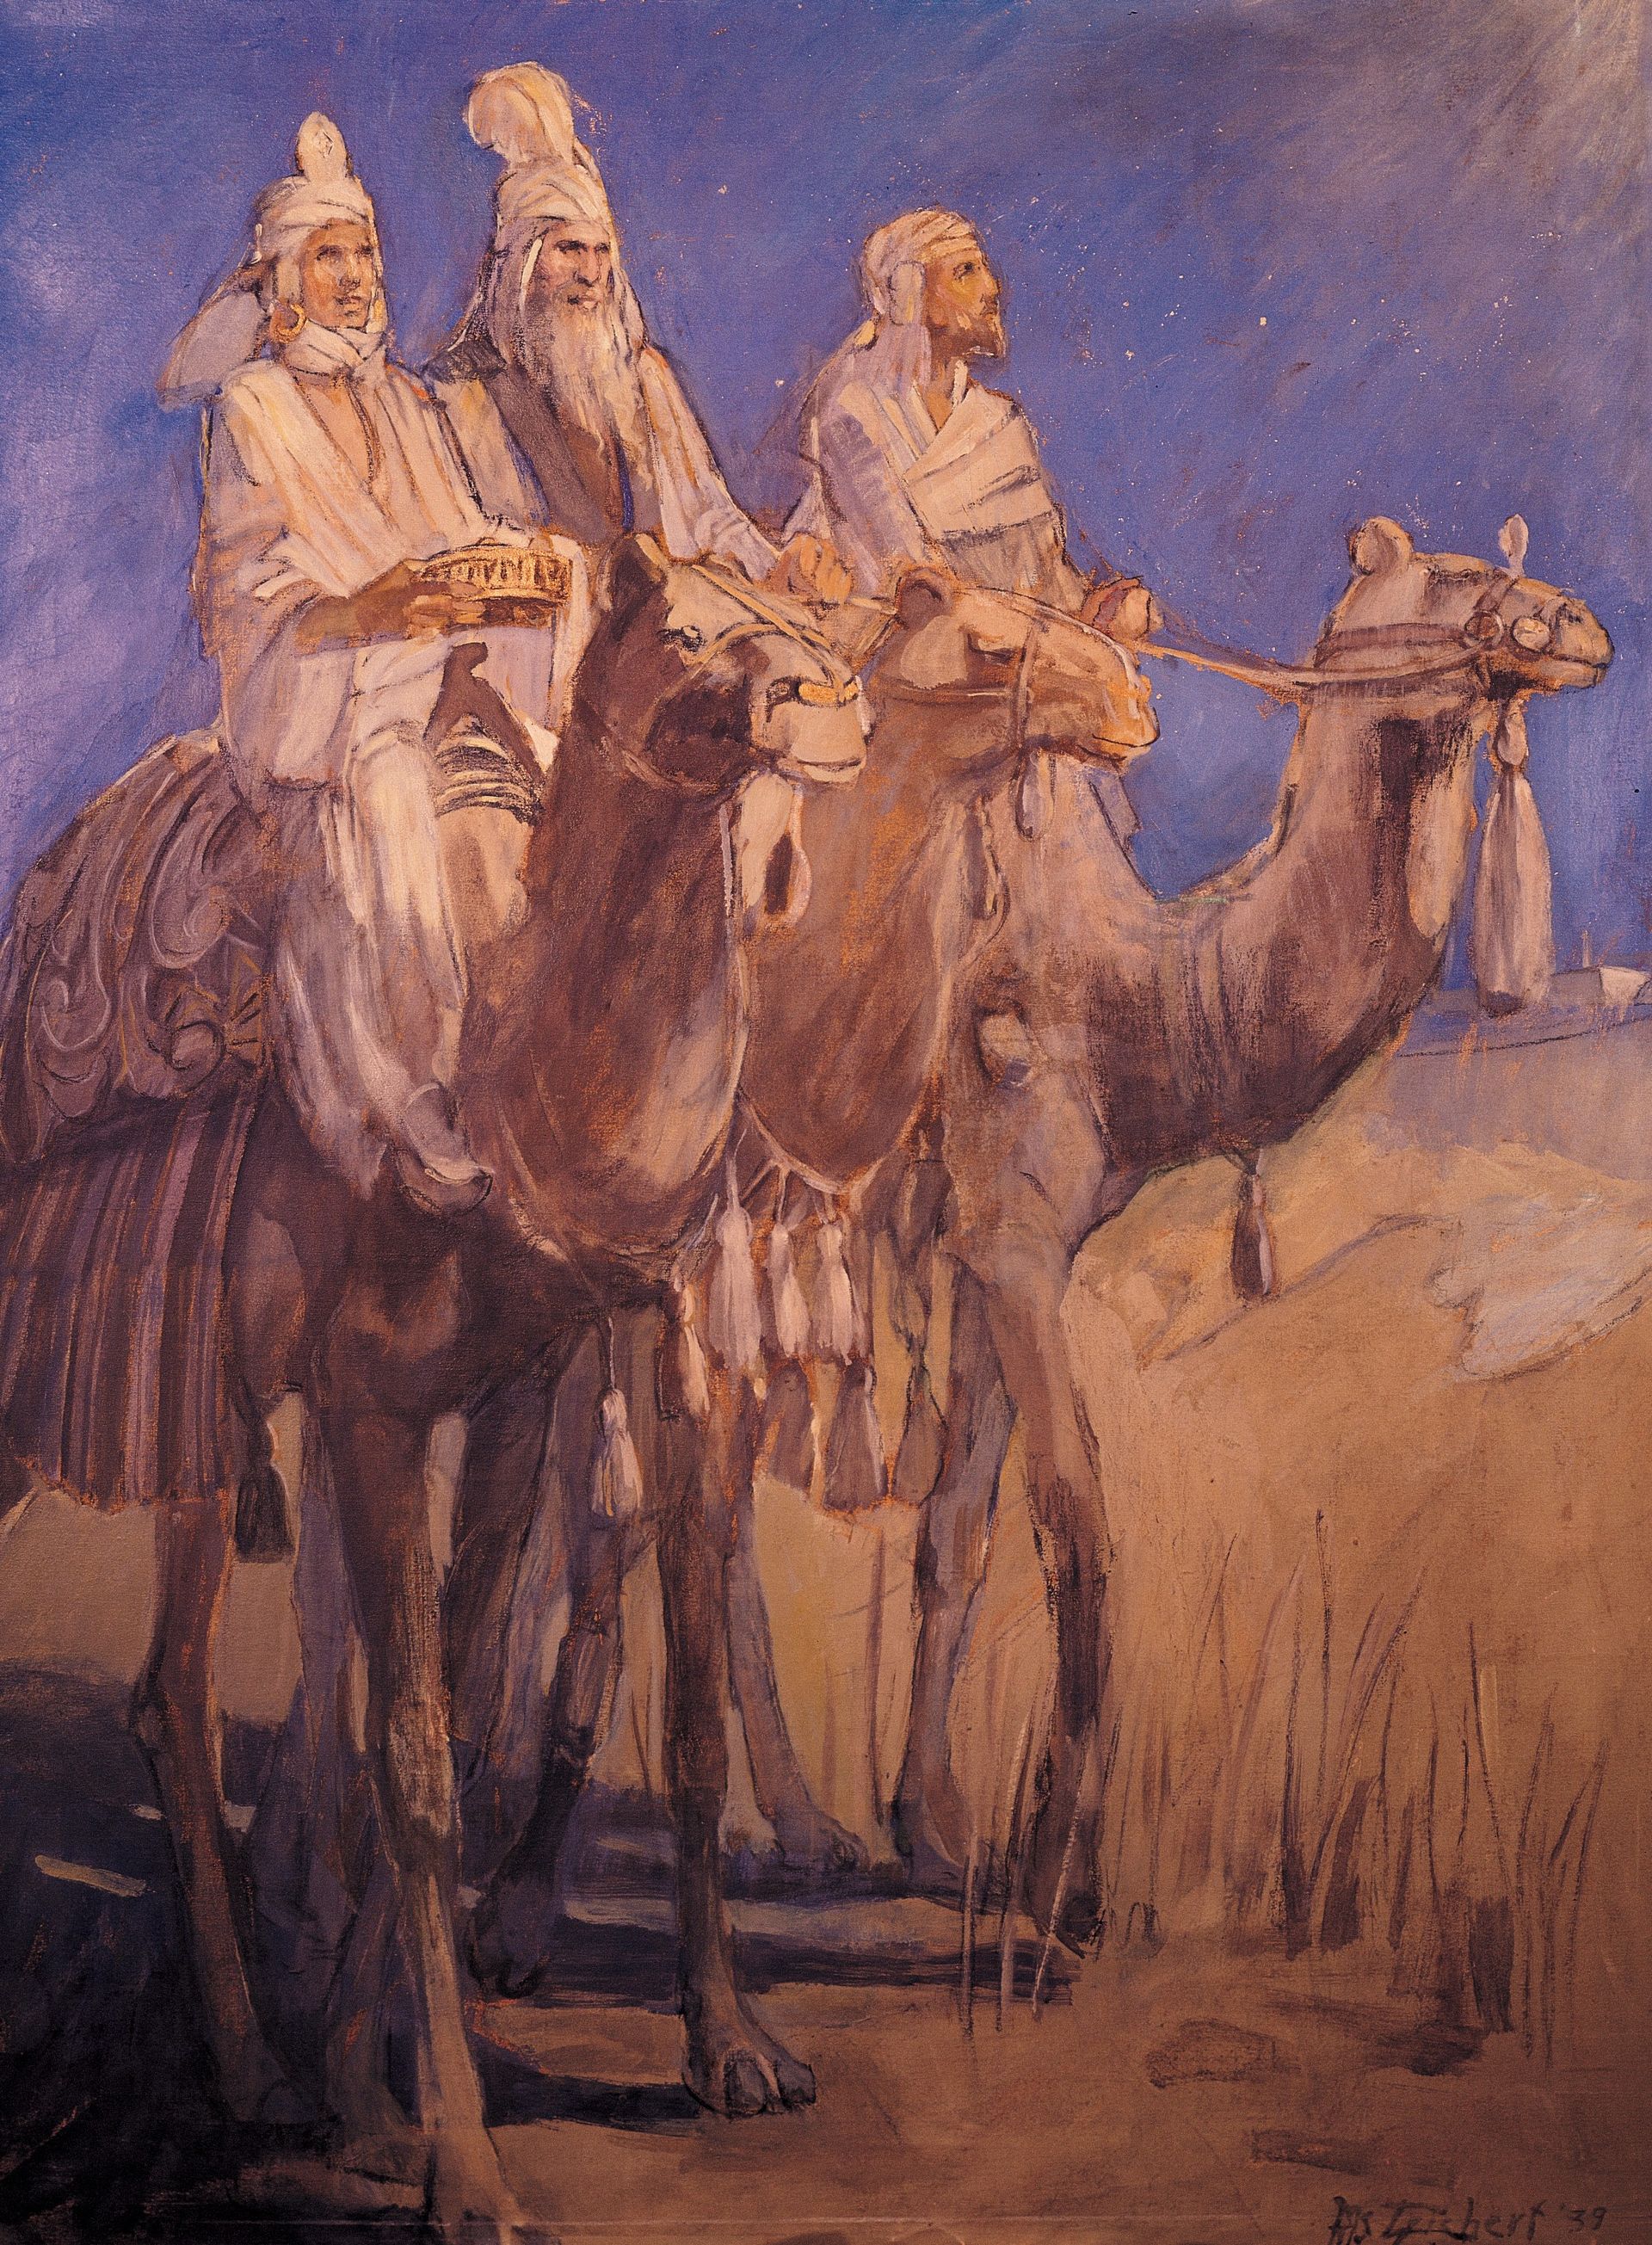 The Wise Men, by Minerva Kohlhepp Teichert (62120); GAK 203; Primary manual 1-78; Primary manual 2-07; Matthew 2:1–12; 3 Nephi 1:21
This image is to be used for Church purposes only. © undefined ipCode 1.